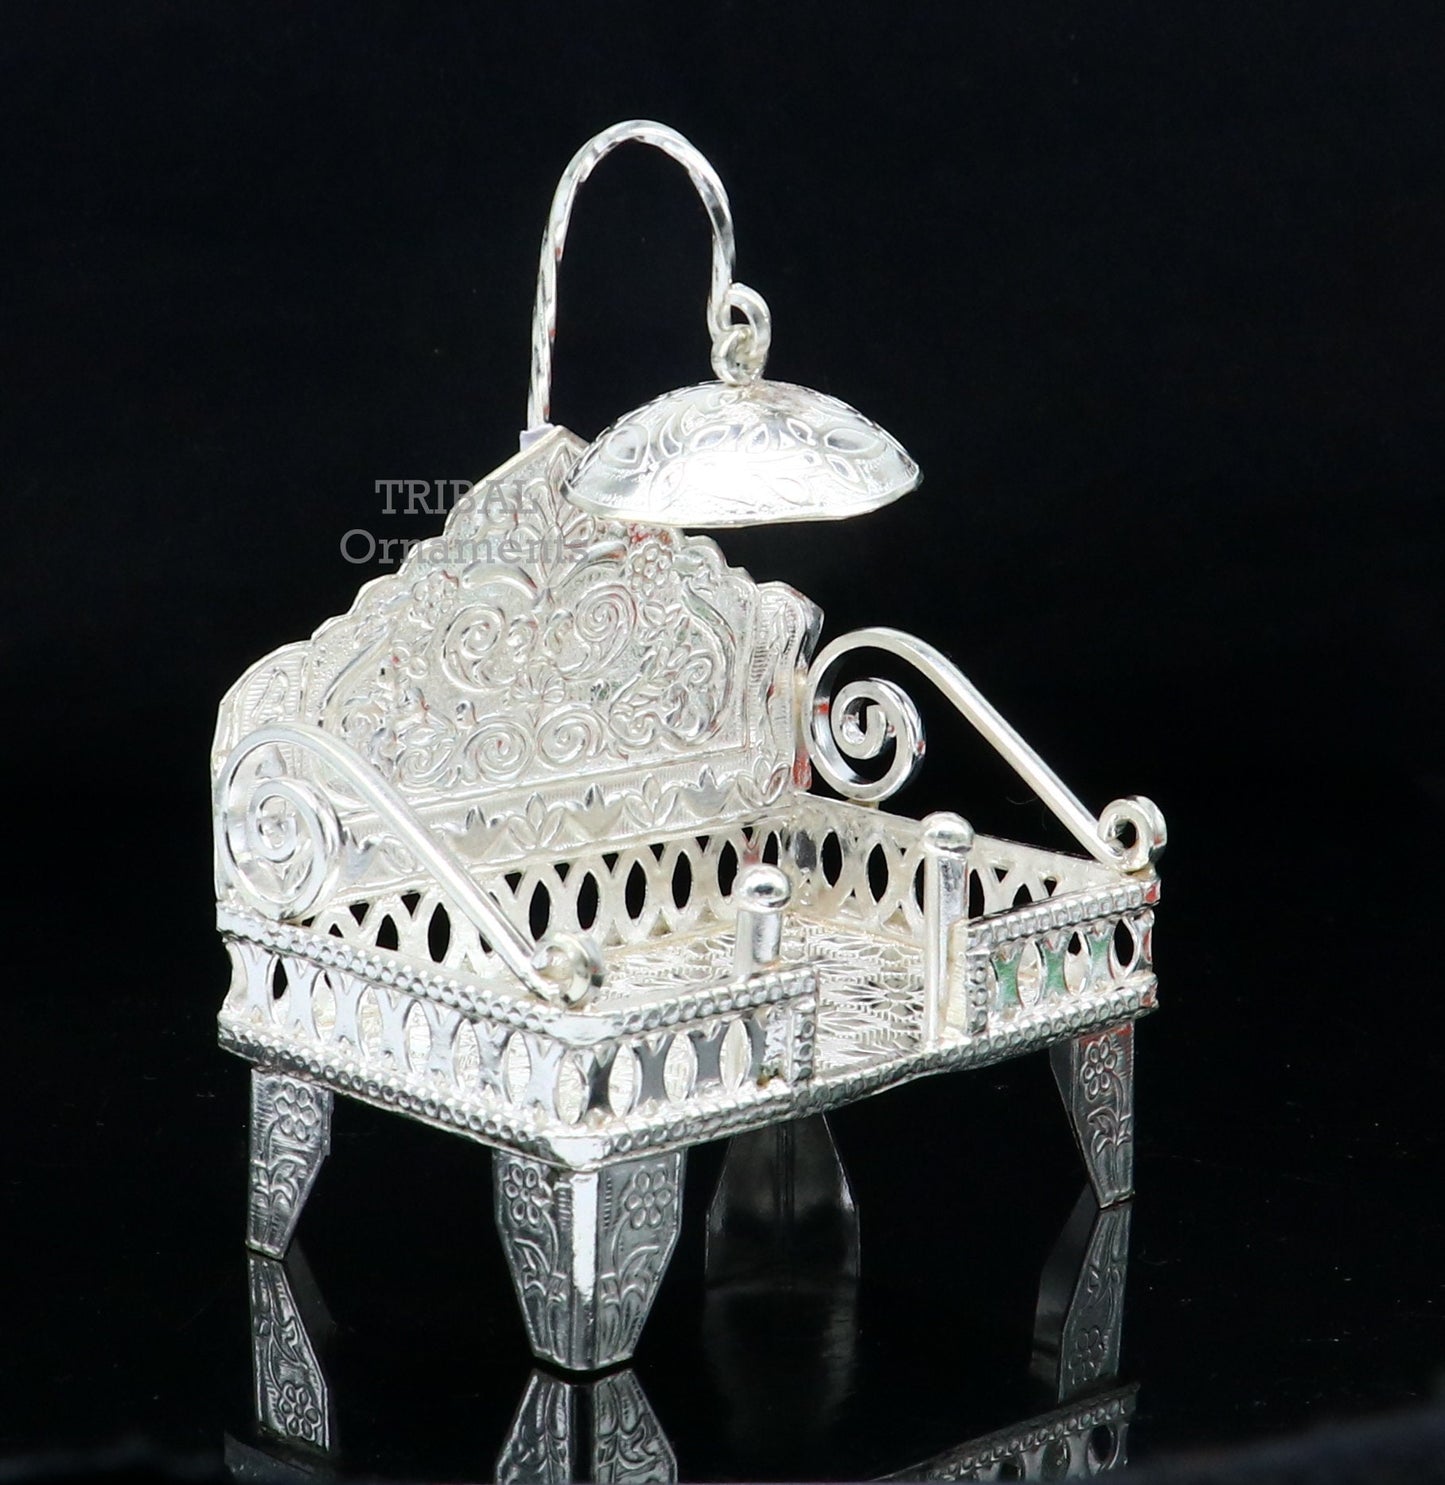 925 pure sterling silver handcrafted small singhasan, idol krishna Bal Gopala throne, god statue's stand chair, temple puja article su782 - TRIBAL ORNAMENTS